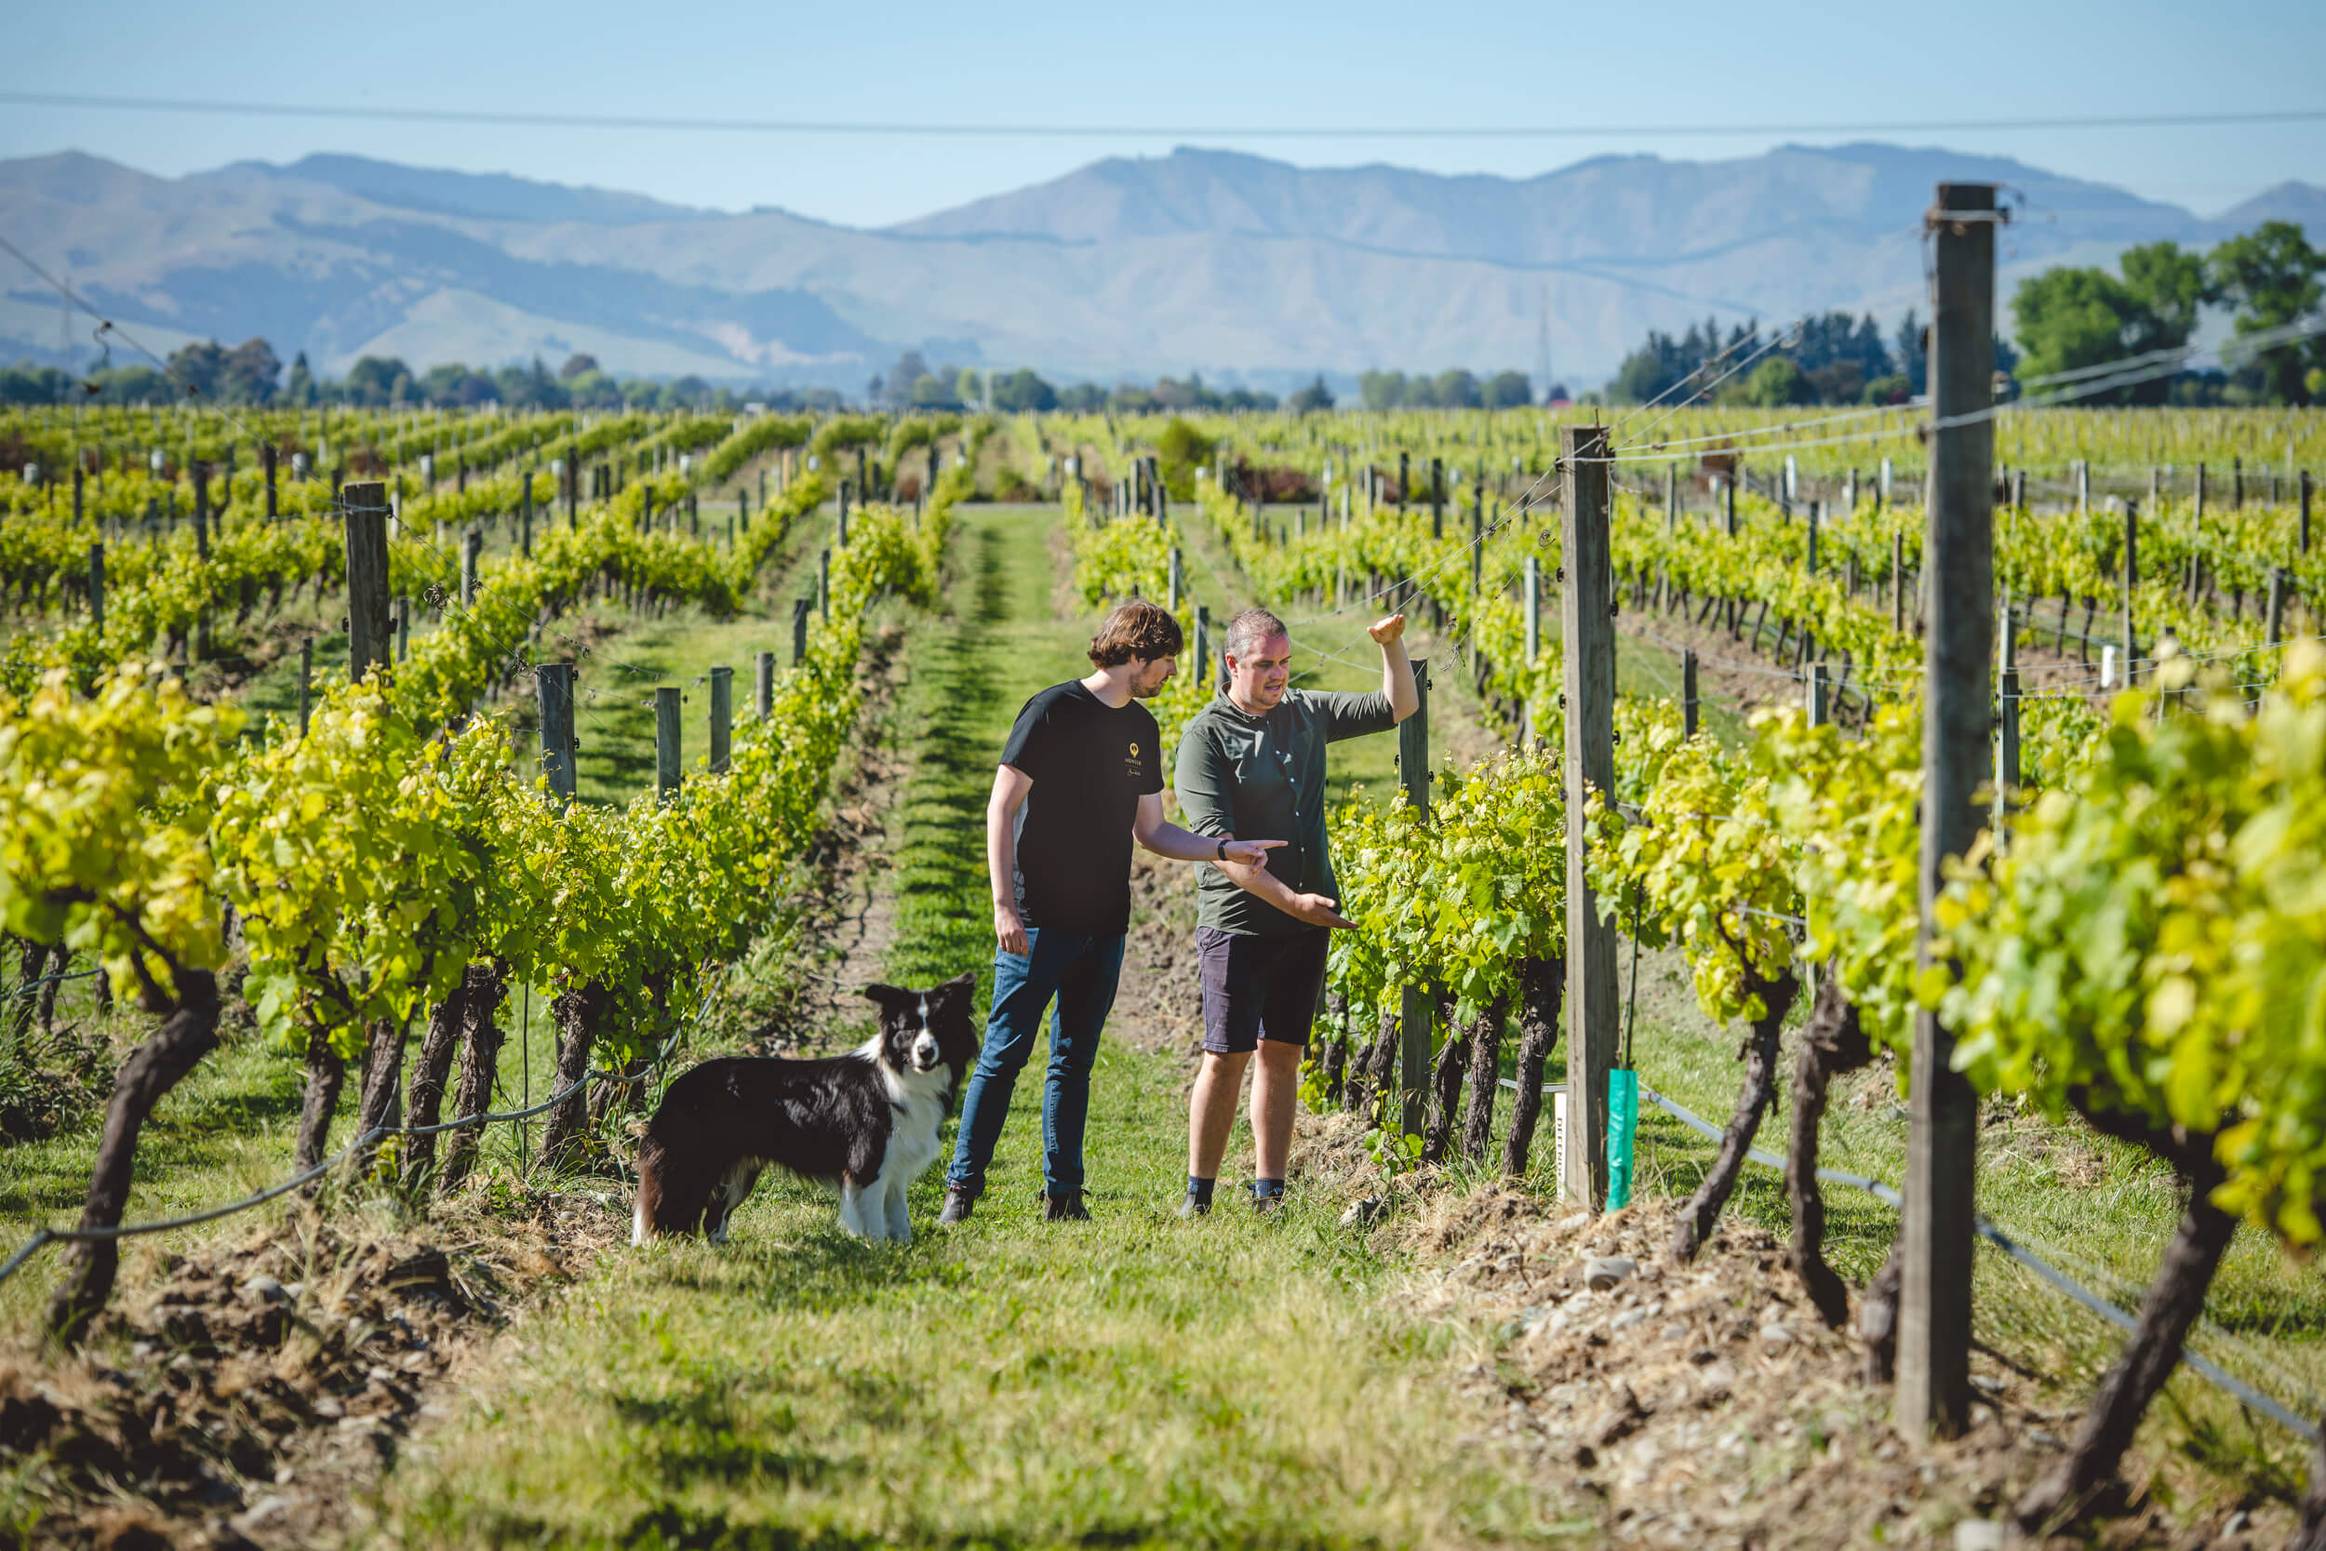 James and Edward Macdonald with Billy the dog, in the vineyards.